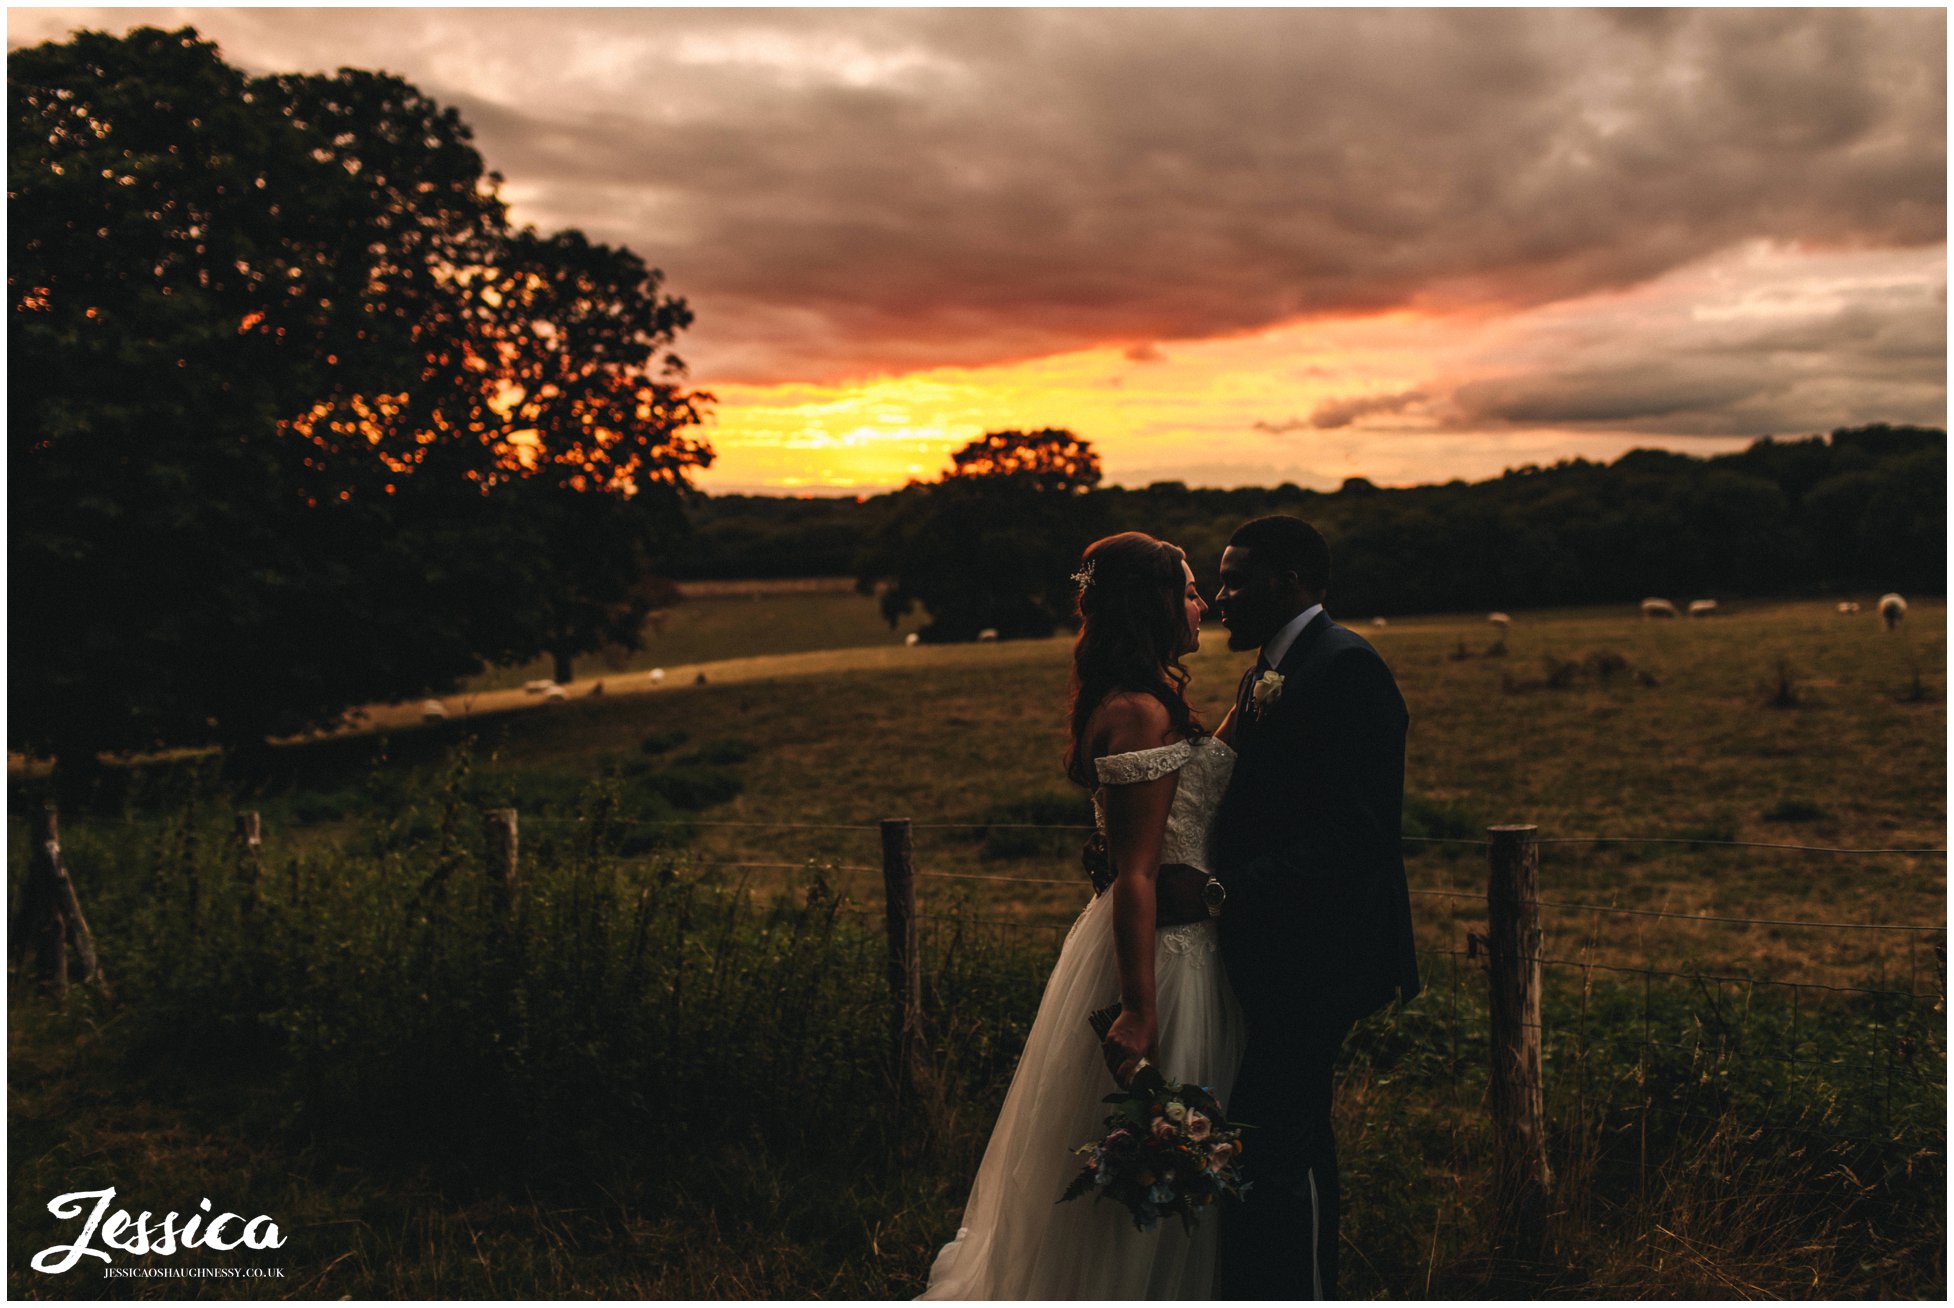 the couple stand in front of the sunset at gaynes park in epping